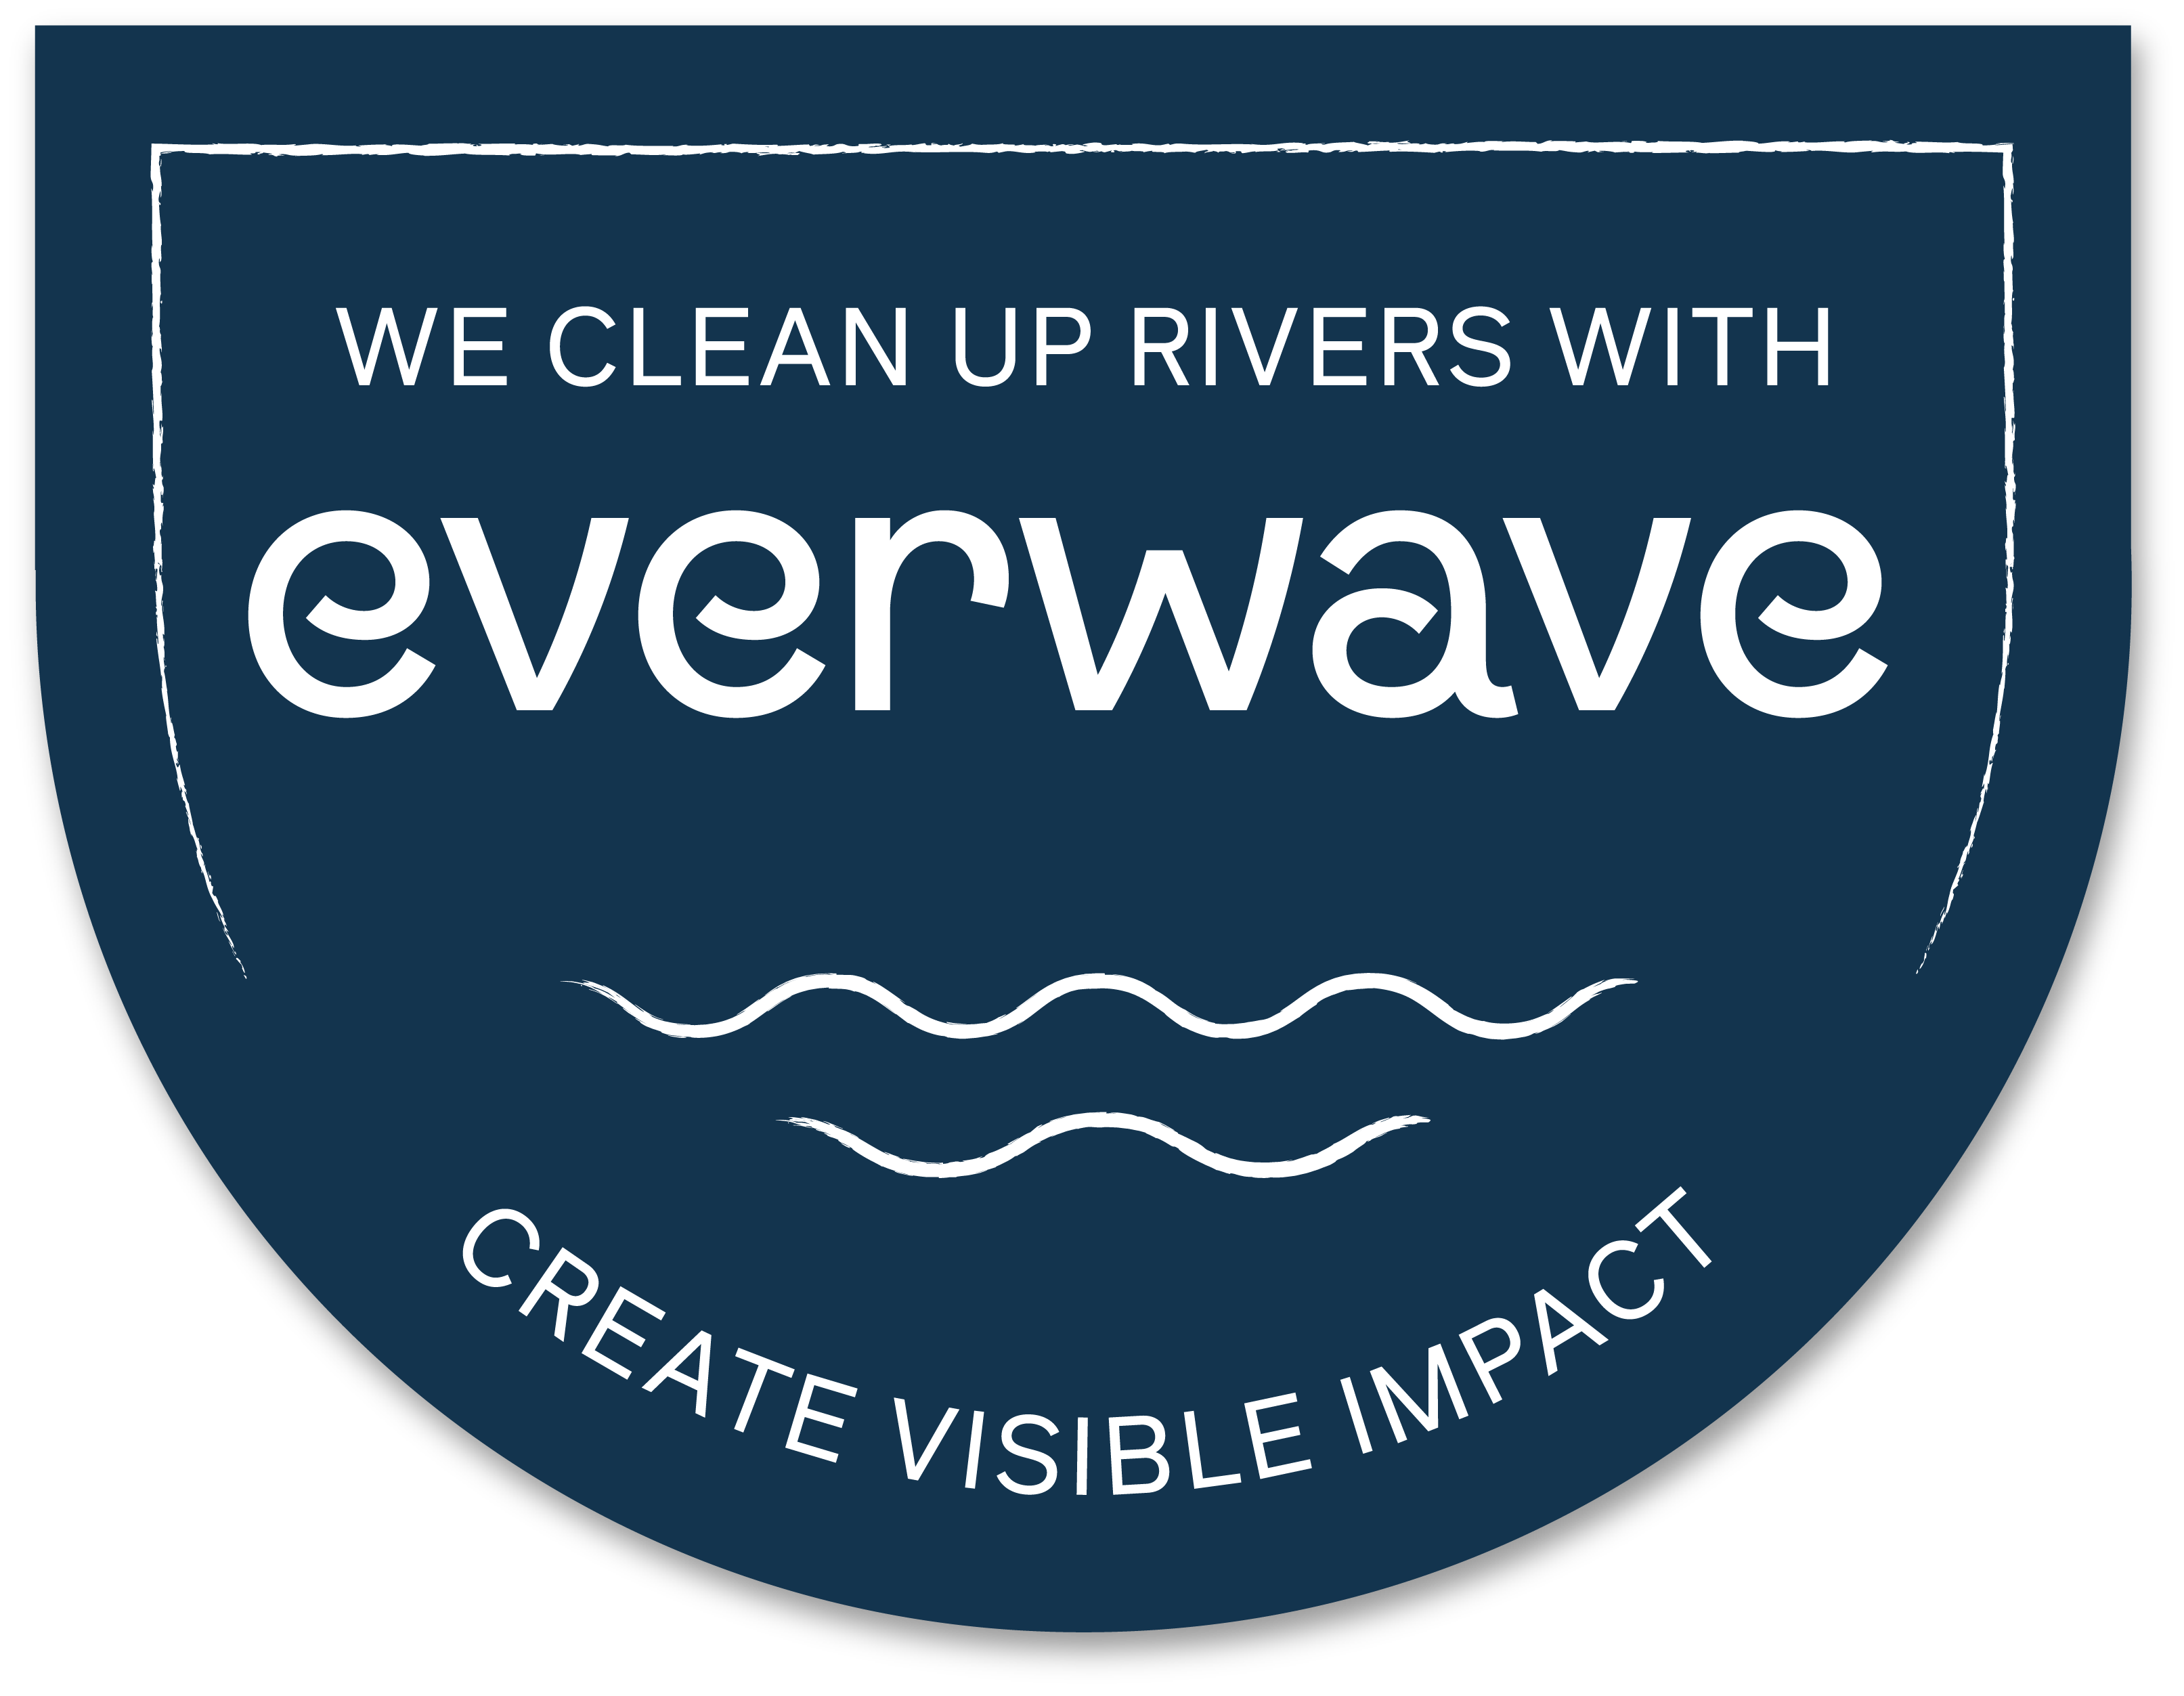 everwave siegel mit dem text "we clean up rivers with everwave, create visible impact"